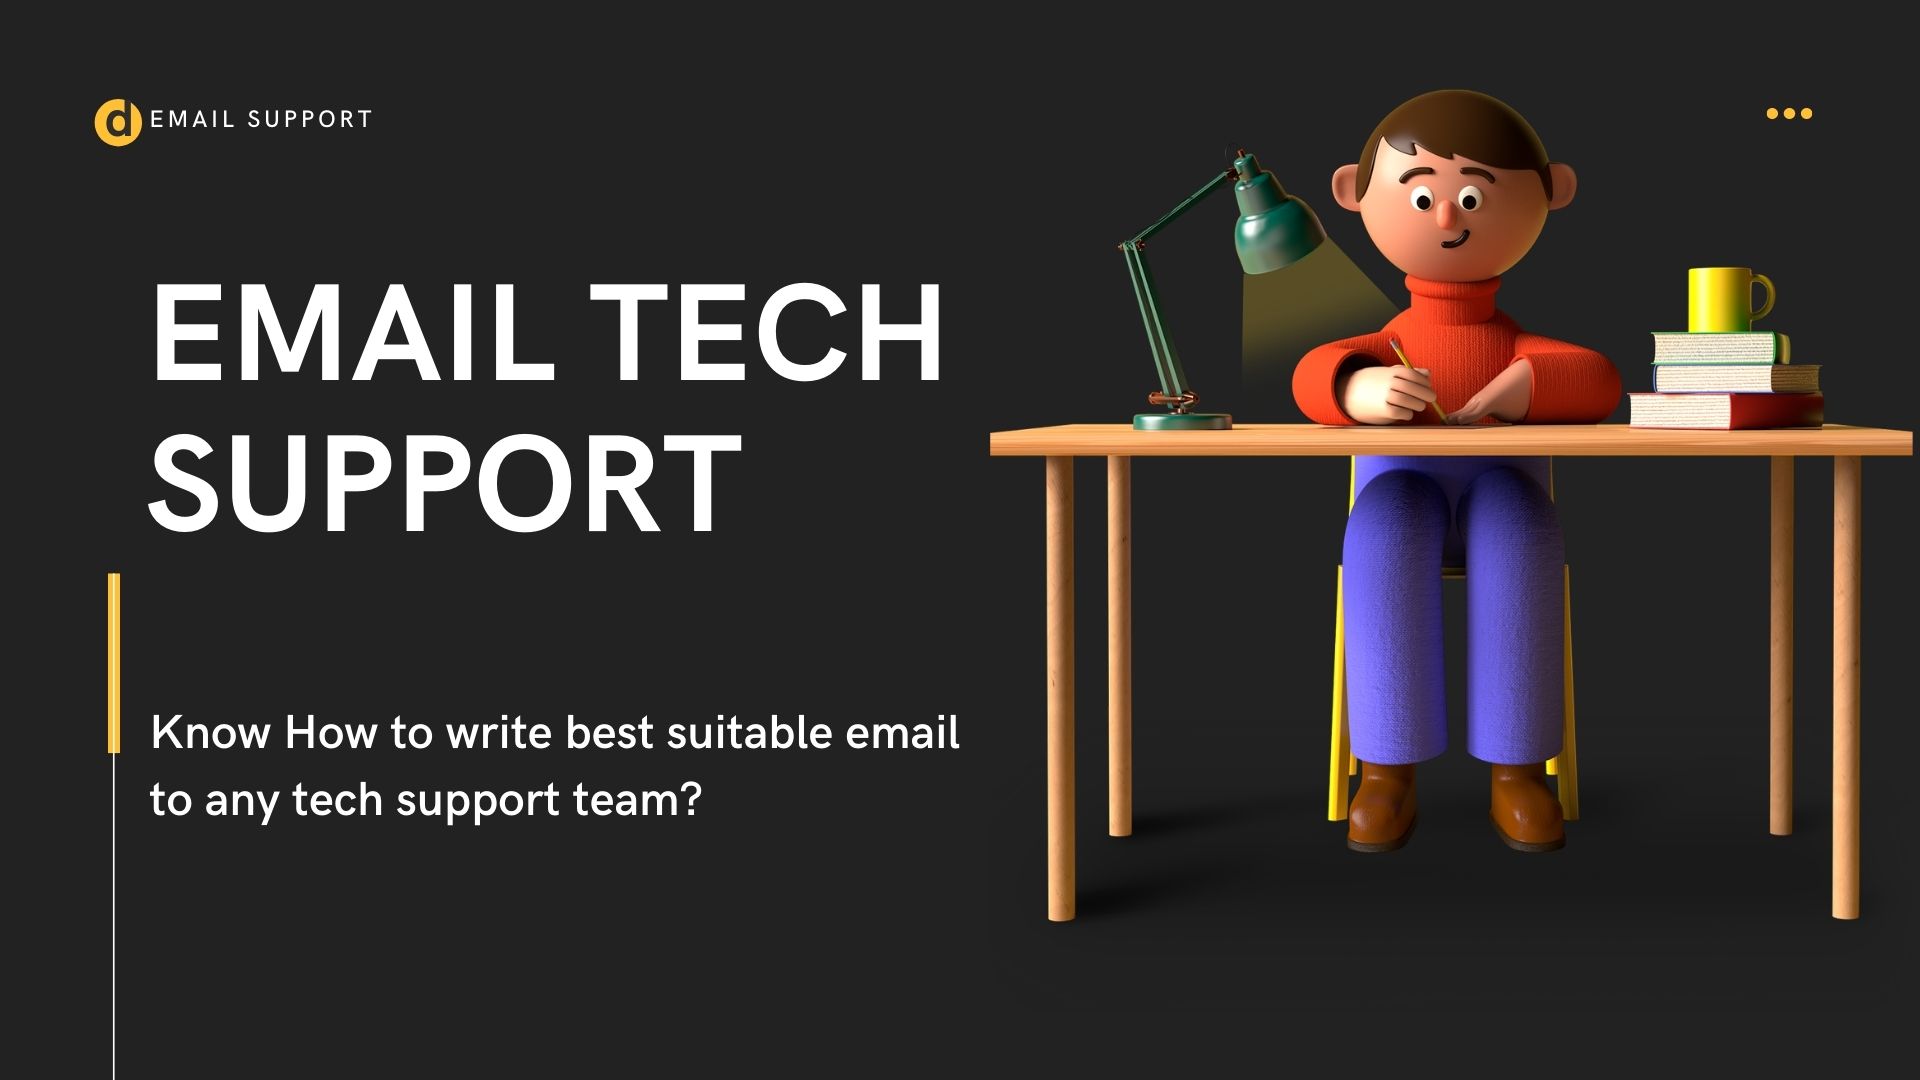 Email Tech Support 1-888-420-8666: Best Specialist Services